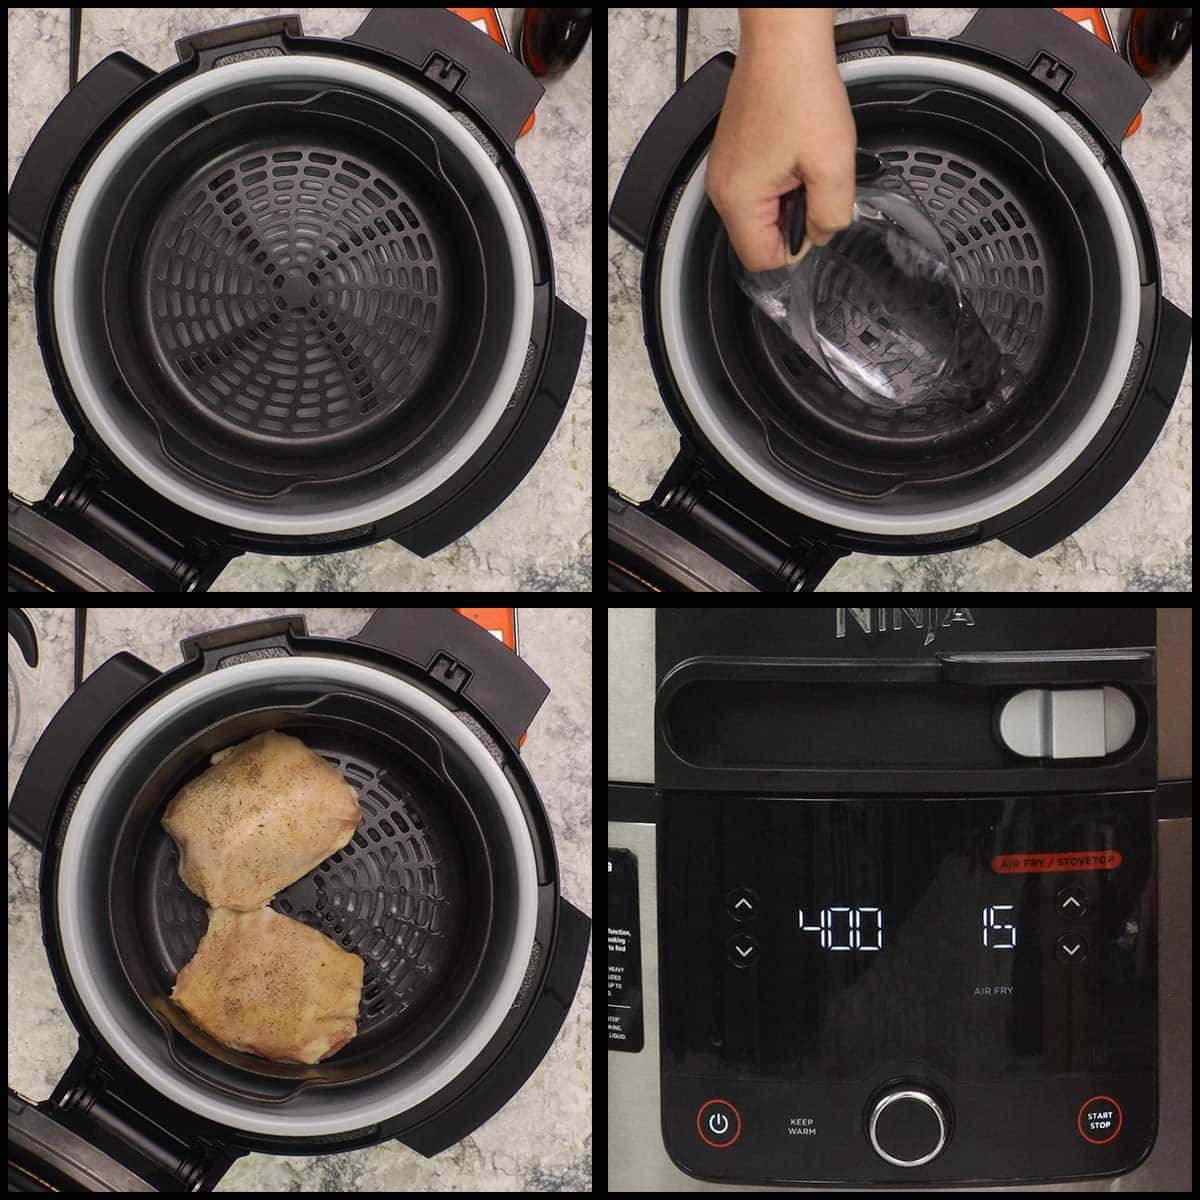 preparing air fryer with water and chicken before air frying.